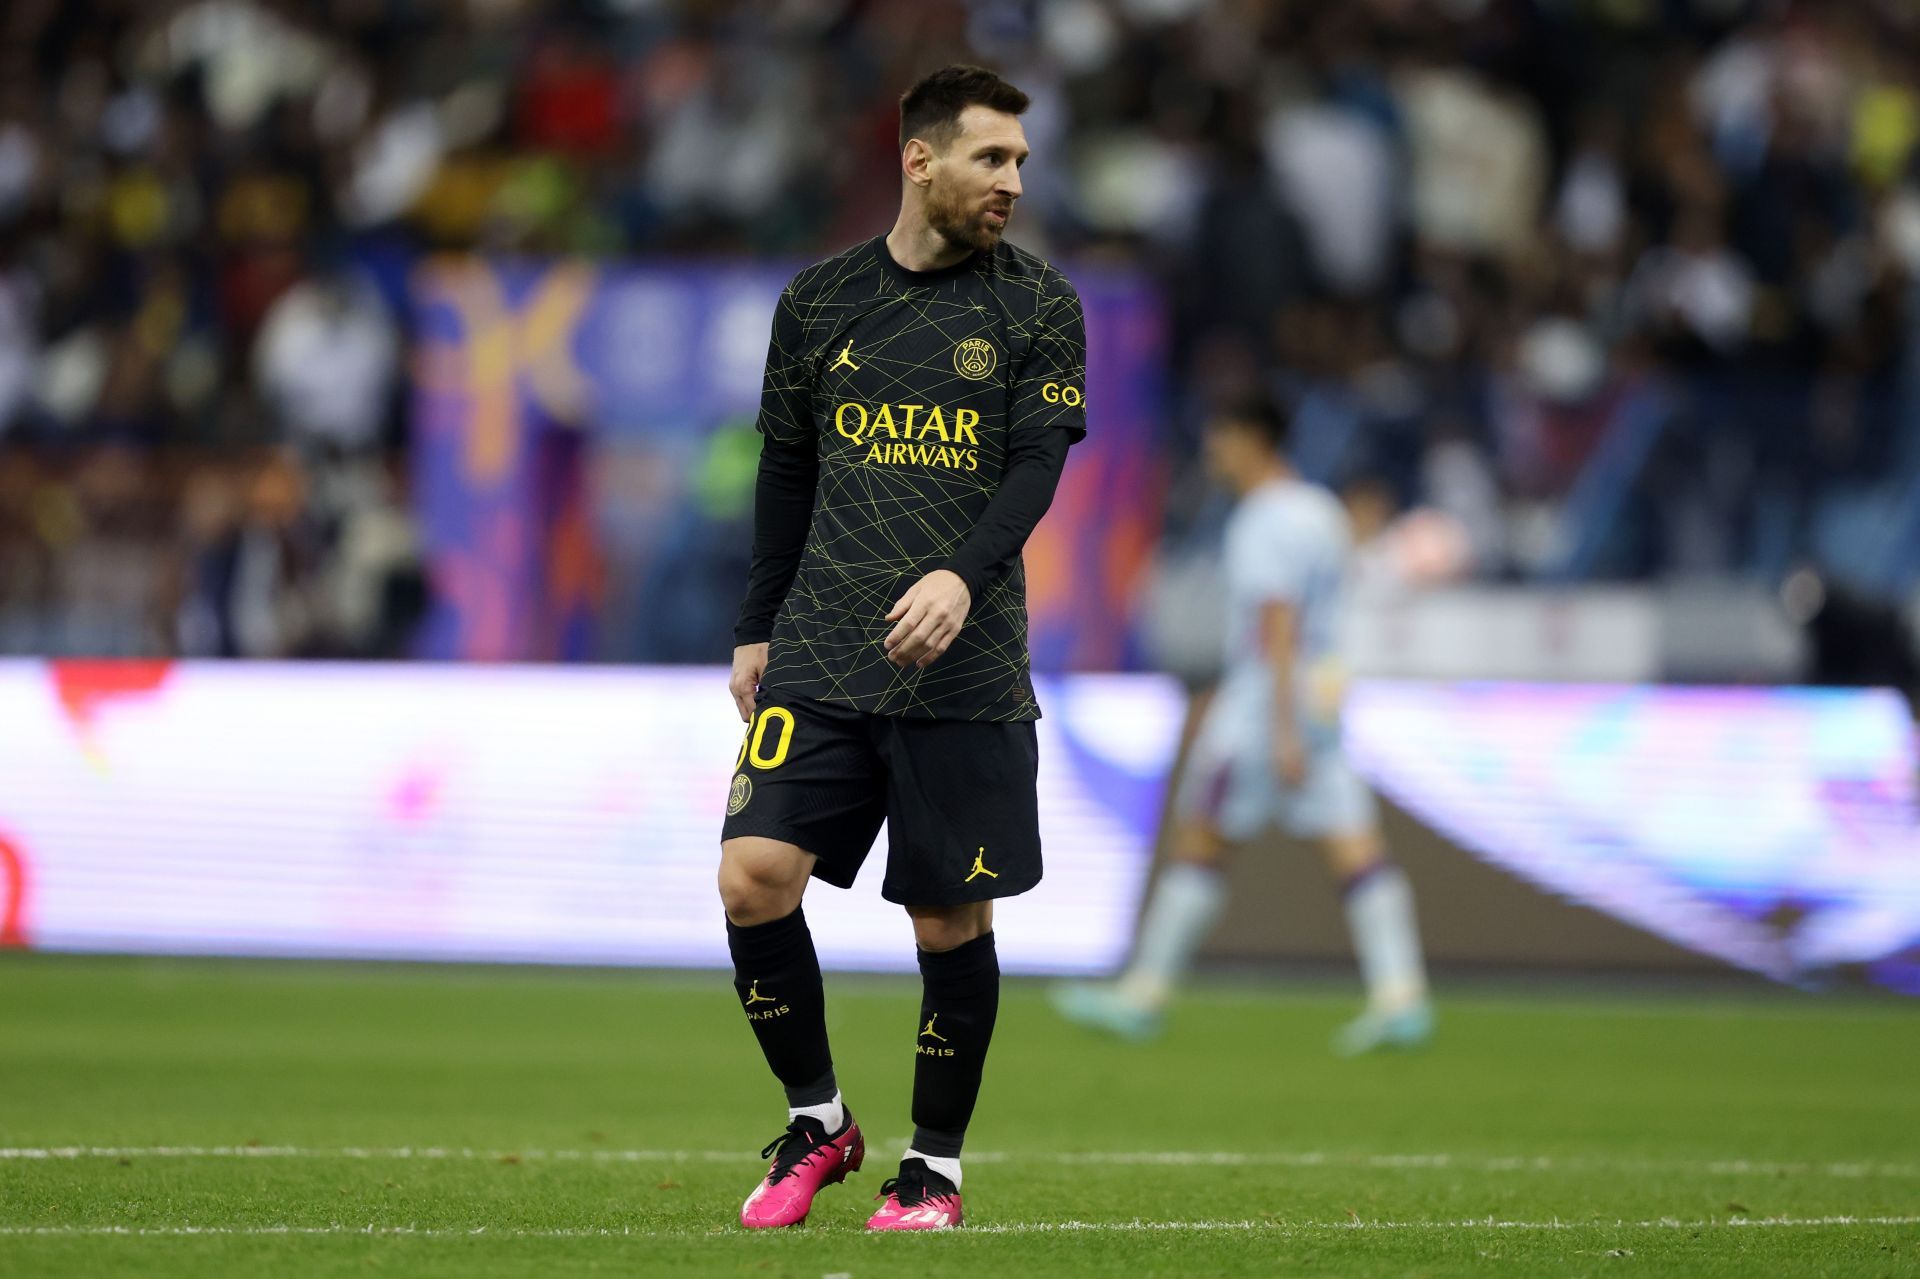 Paris Saint-Germain superstar Lionel Messi will be hoping to win the Champions League this season